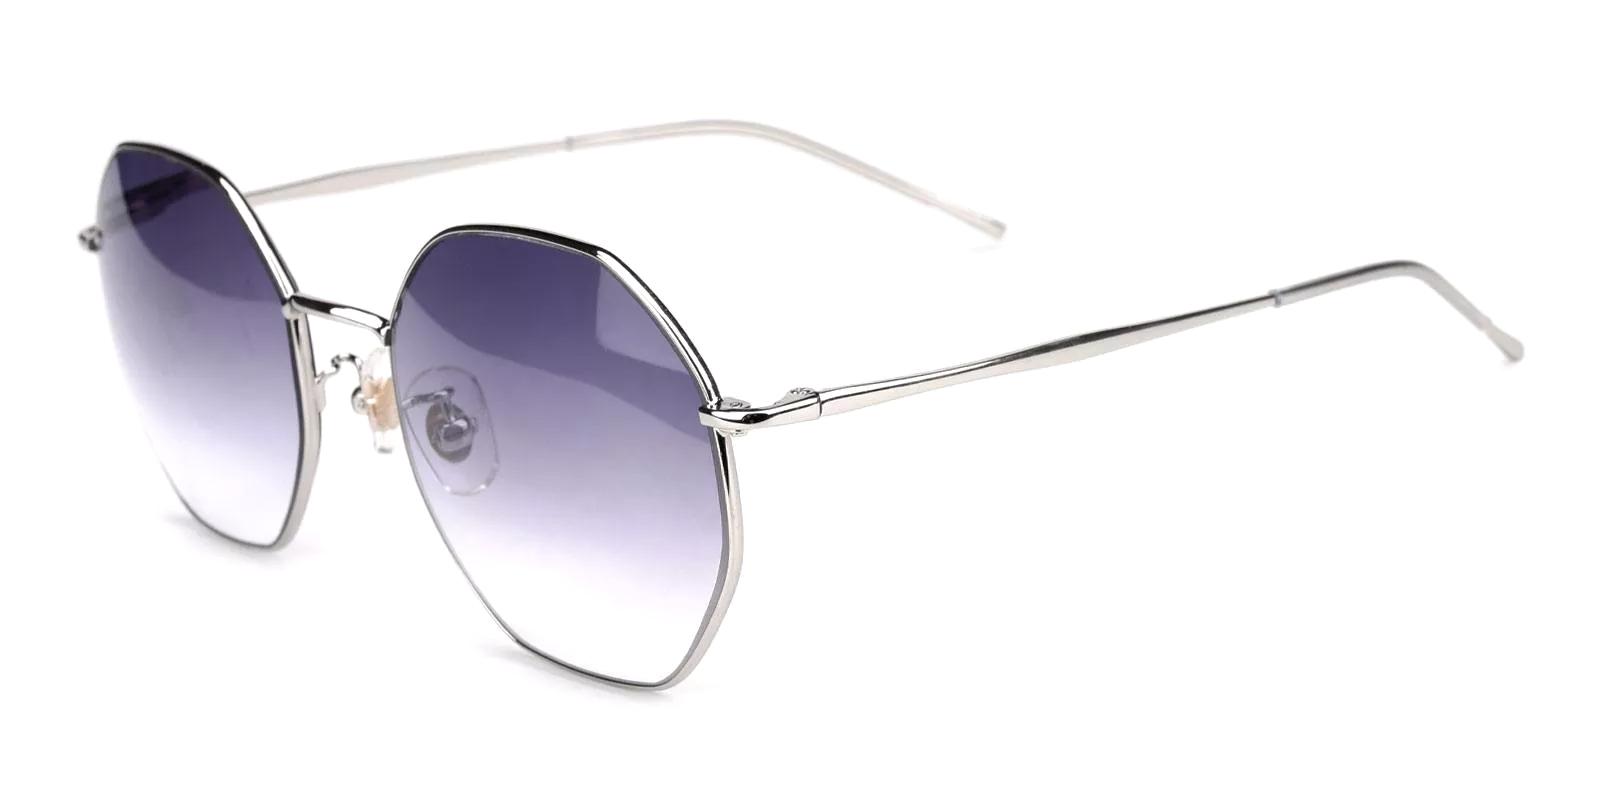 Sarcile Silver Metal NosePads , Sunglasses Frames from ABBE Glasses